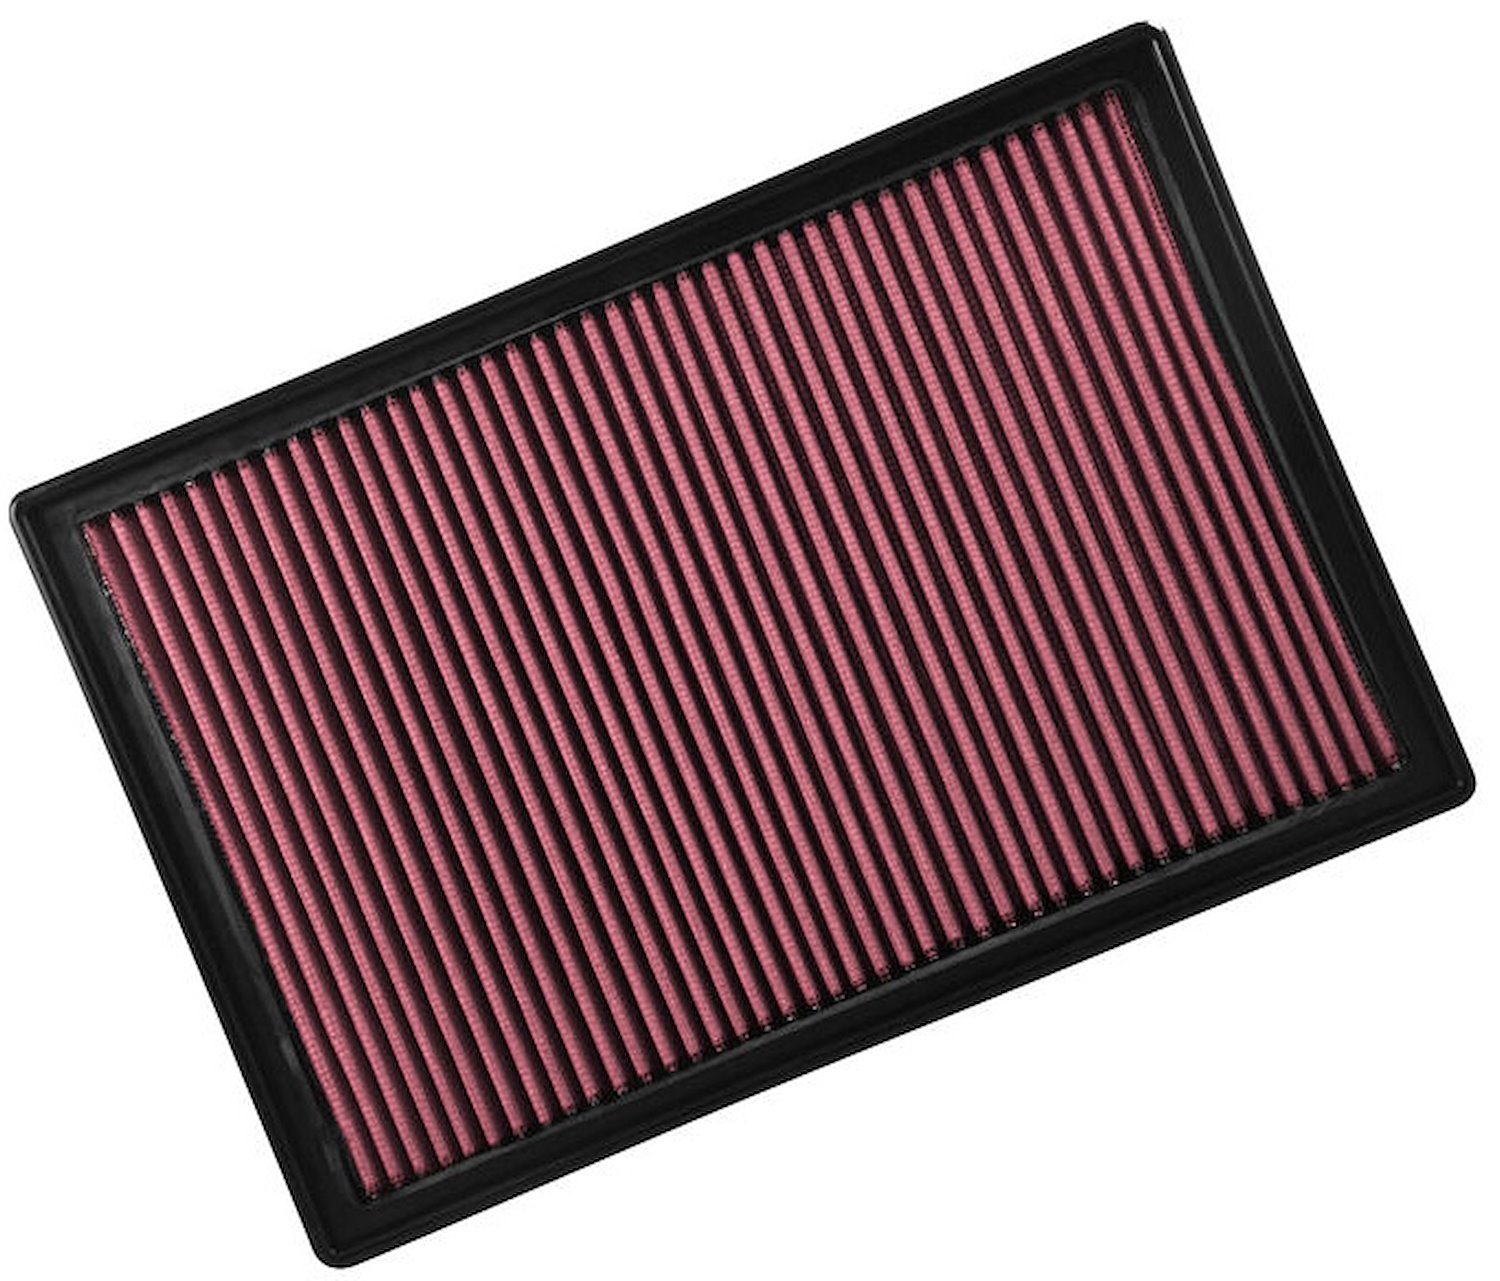 Delta Force OE-Replacement Panel Air Filter 2002-2018 Ram 1500, 2500, 3500 Truck V6/V8 Gas